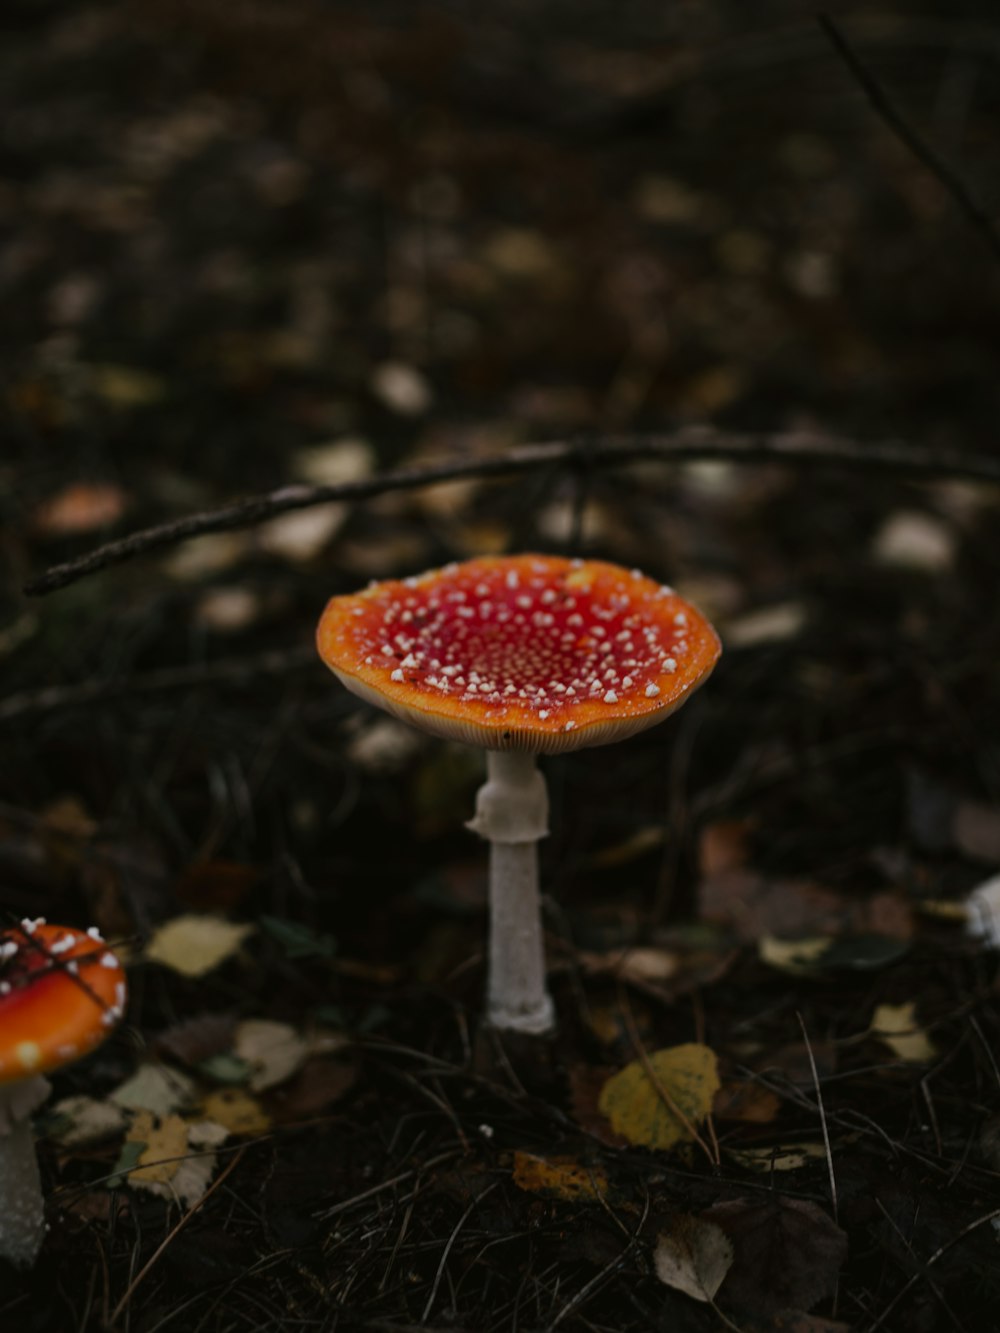 red and white mushroom in forest